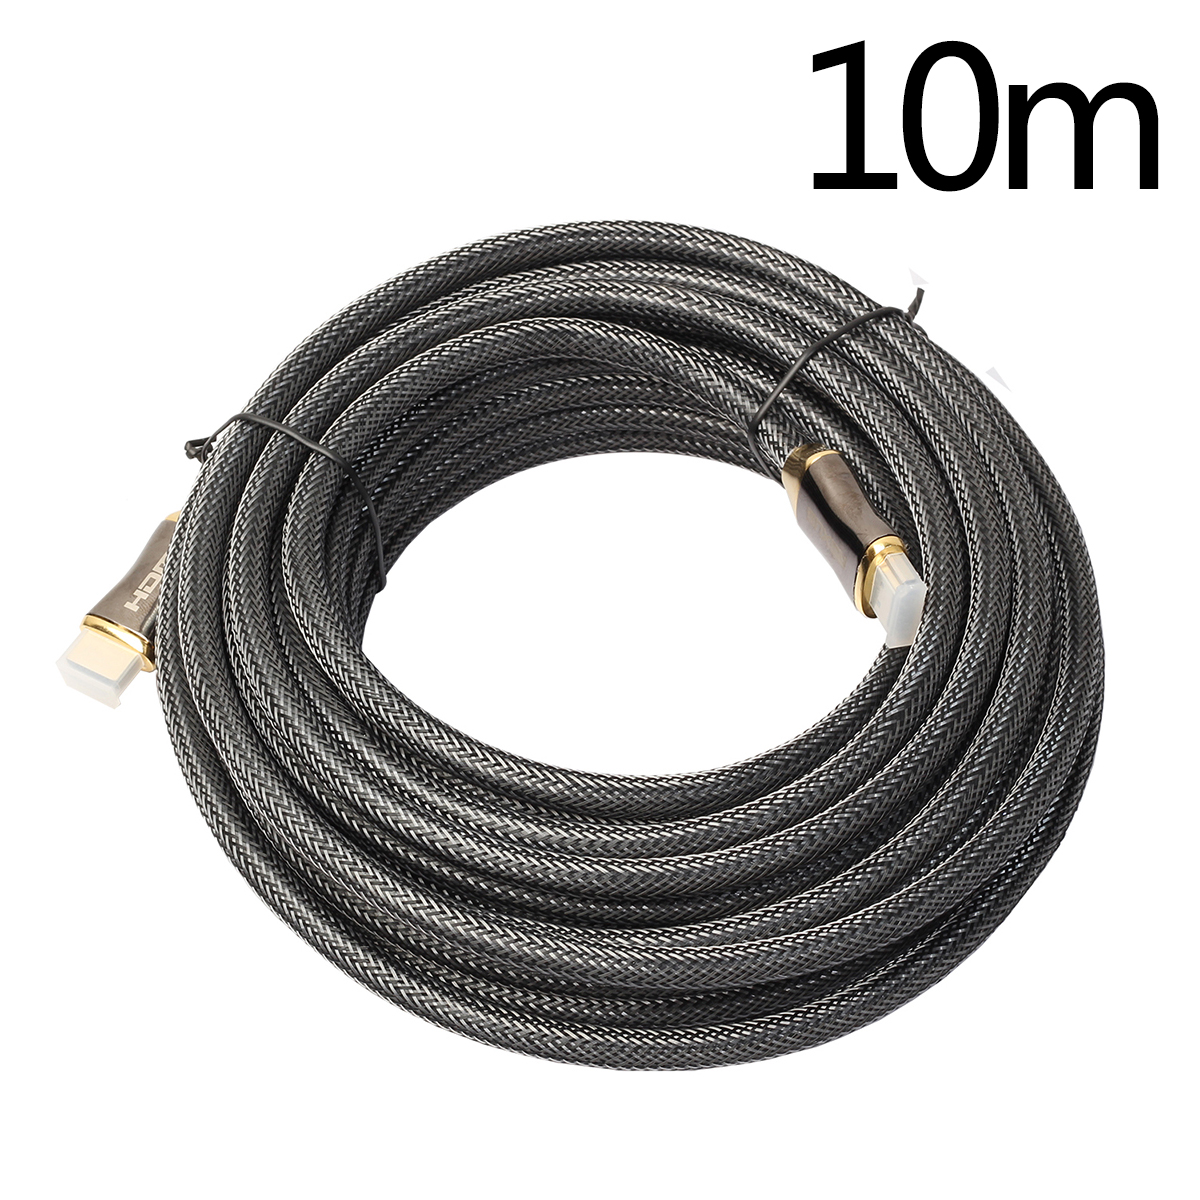 Braided Ultra HD HDMI Cable v2.0 High Speed Ethernet HDTV Cable 10M - Black